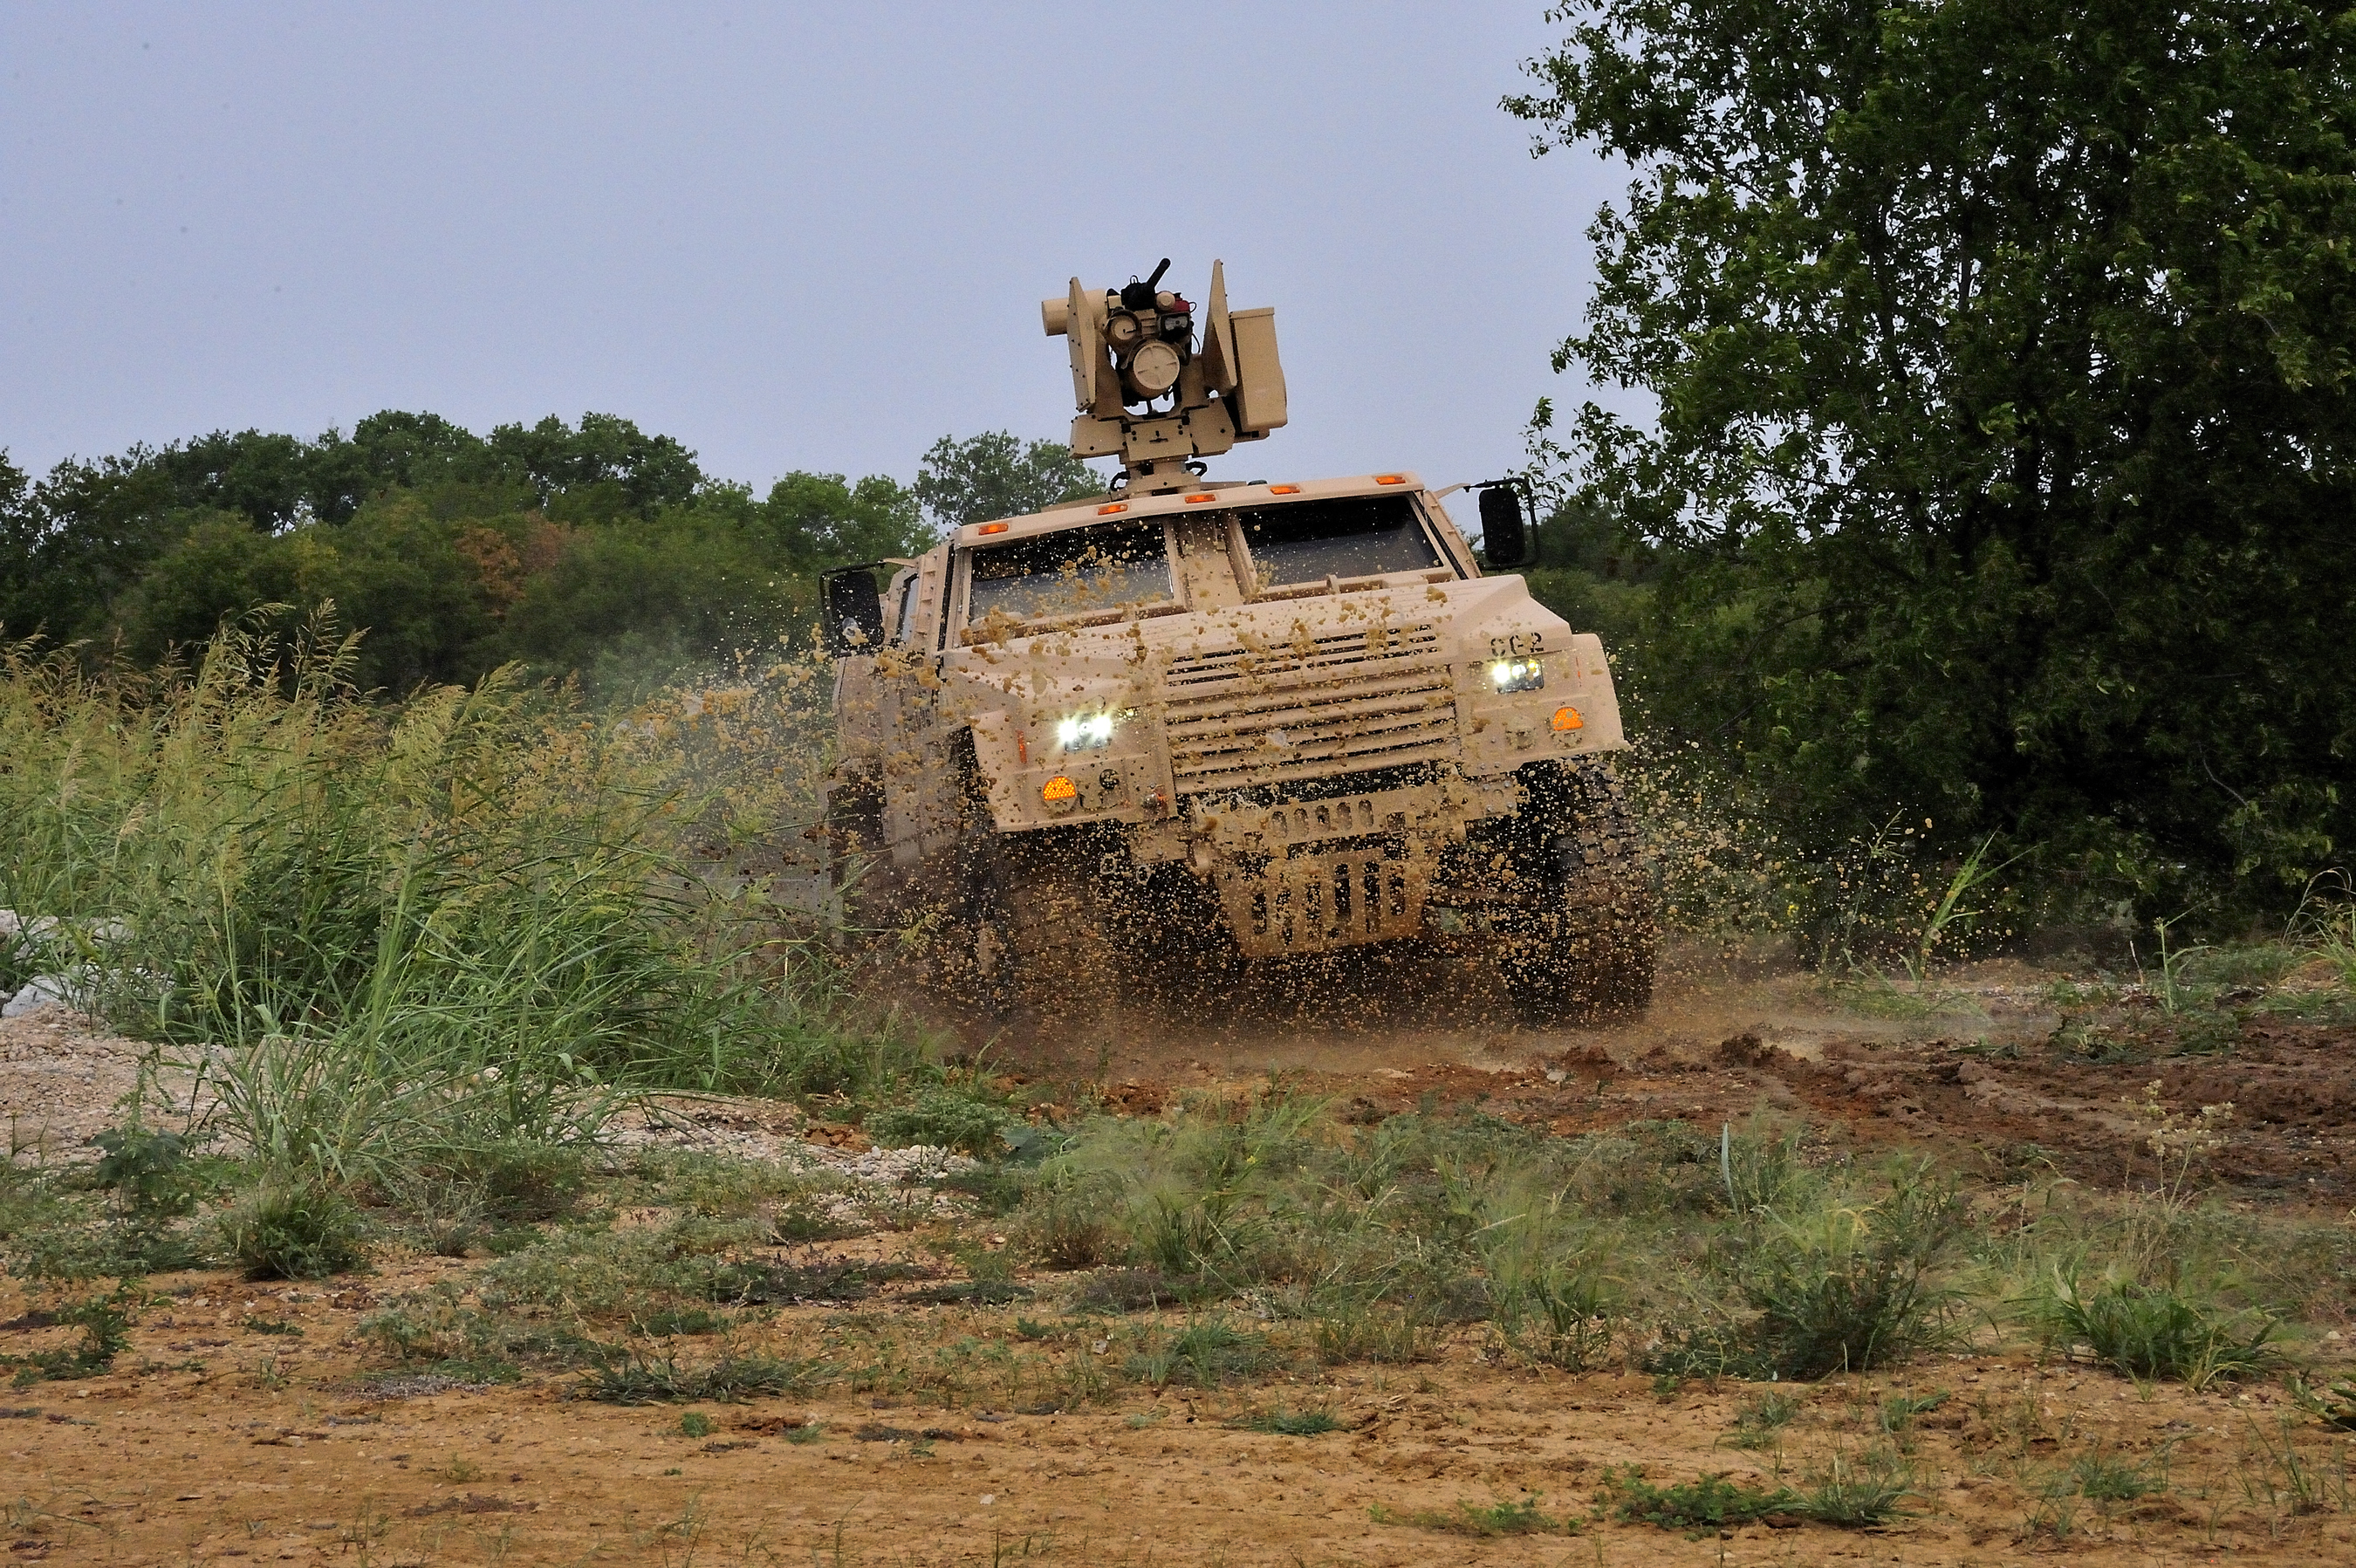 A Lockheed Martin Joint Light Tactical Vehicle undergoes testing at the company's Dallas test track. Lockheed Martin JLTVs have completed more than 100,000 miles of testing during the program's current development phase, and more than 250,000 total miles. (PRNewsFoto/Lockheed Martin)